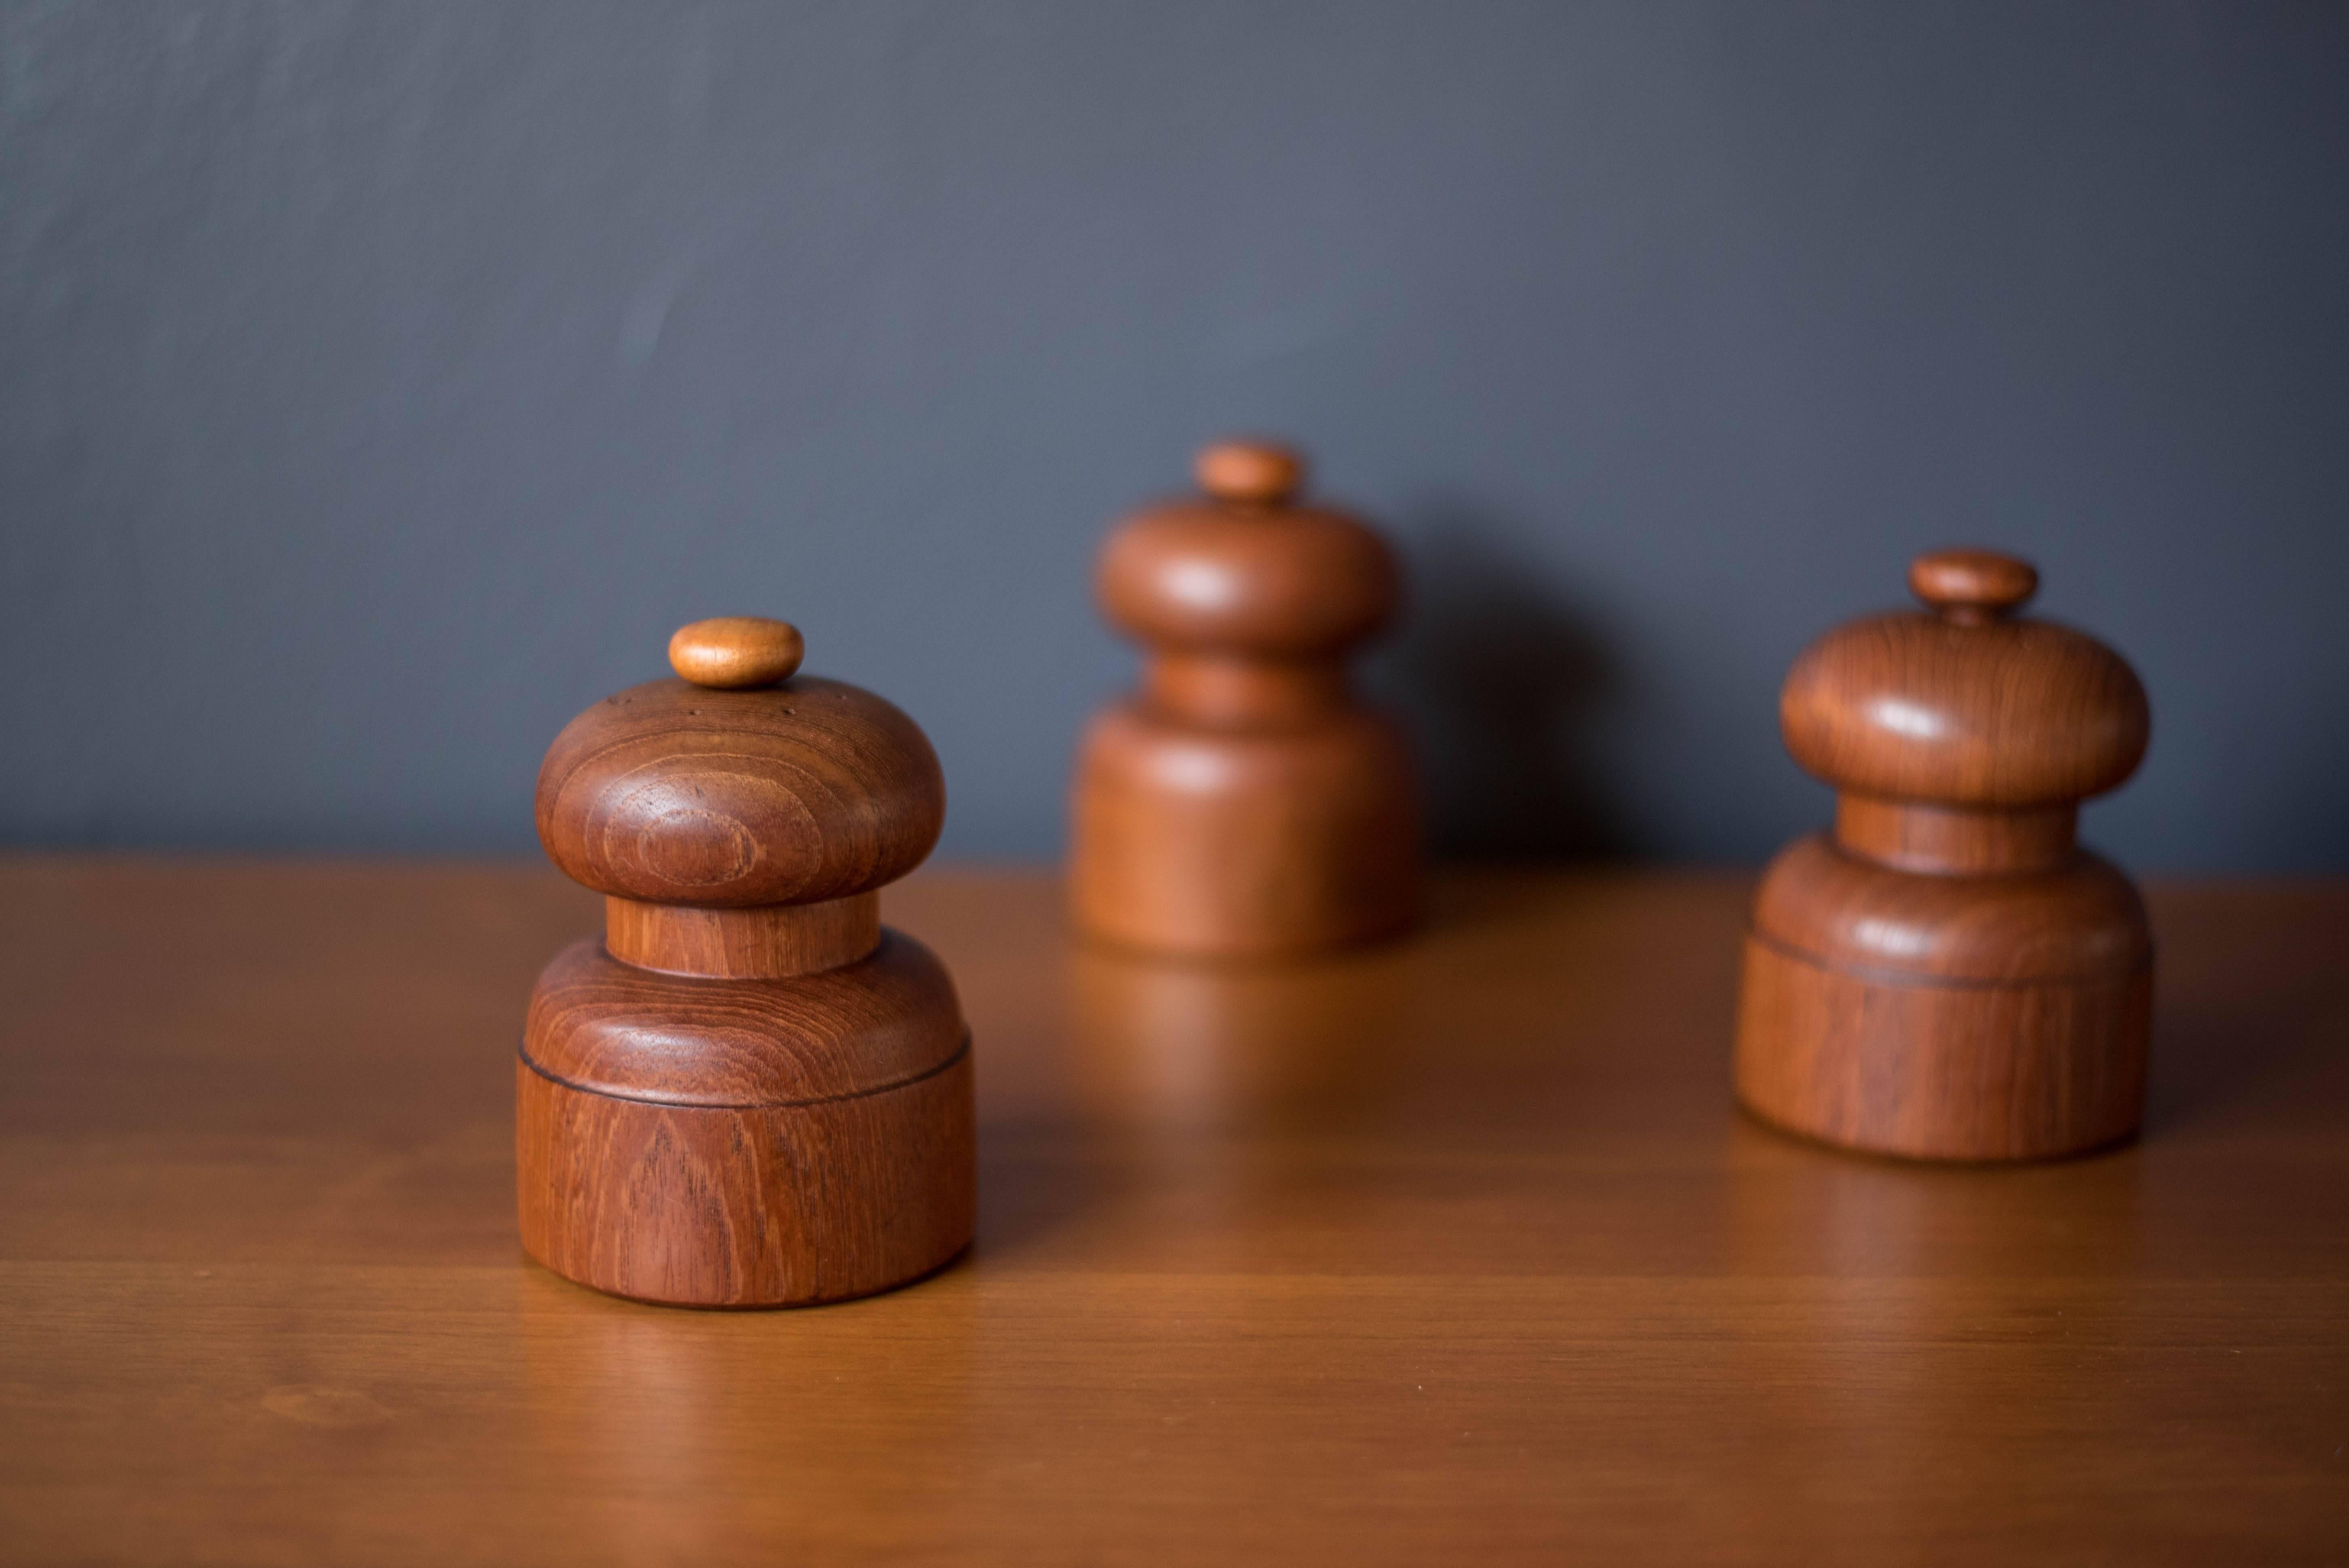 Mid-Century Modern collectible pepper grinders designed by Jens Quistgaard for Dansk. Each piece is made of teak and is marked Denmark on the bottom. Price is for each.